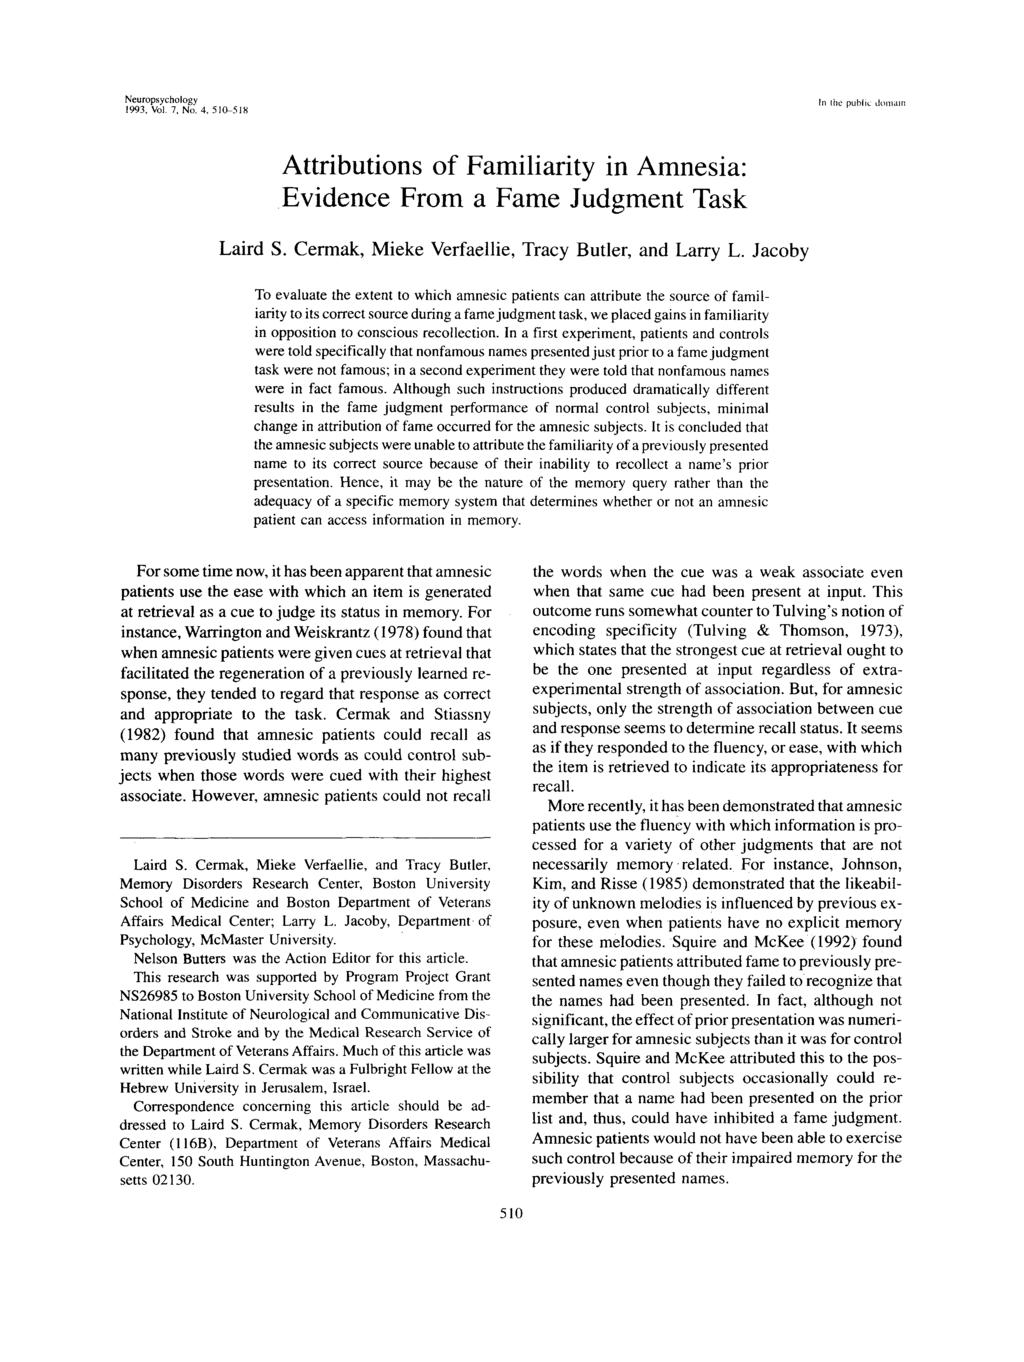 Neuropsychology 1993, Vol. 7, No. 4, 510-518 In (he public domain Attributions of Familiarity in Amnesia: Evidence From a Fame Judgment Task Laird S.